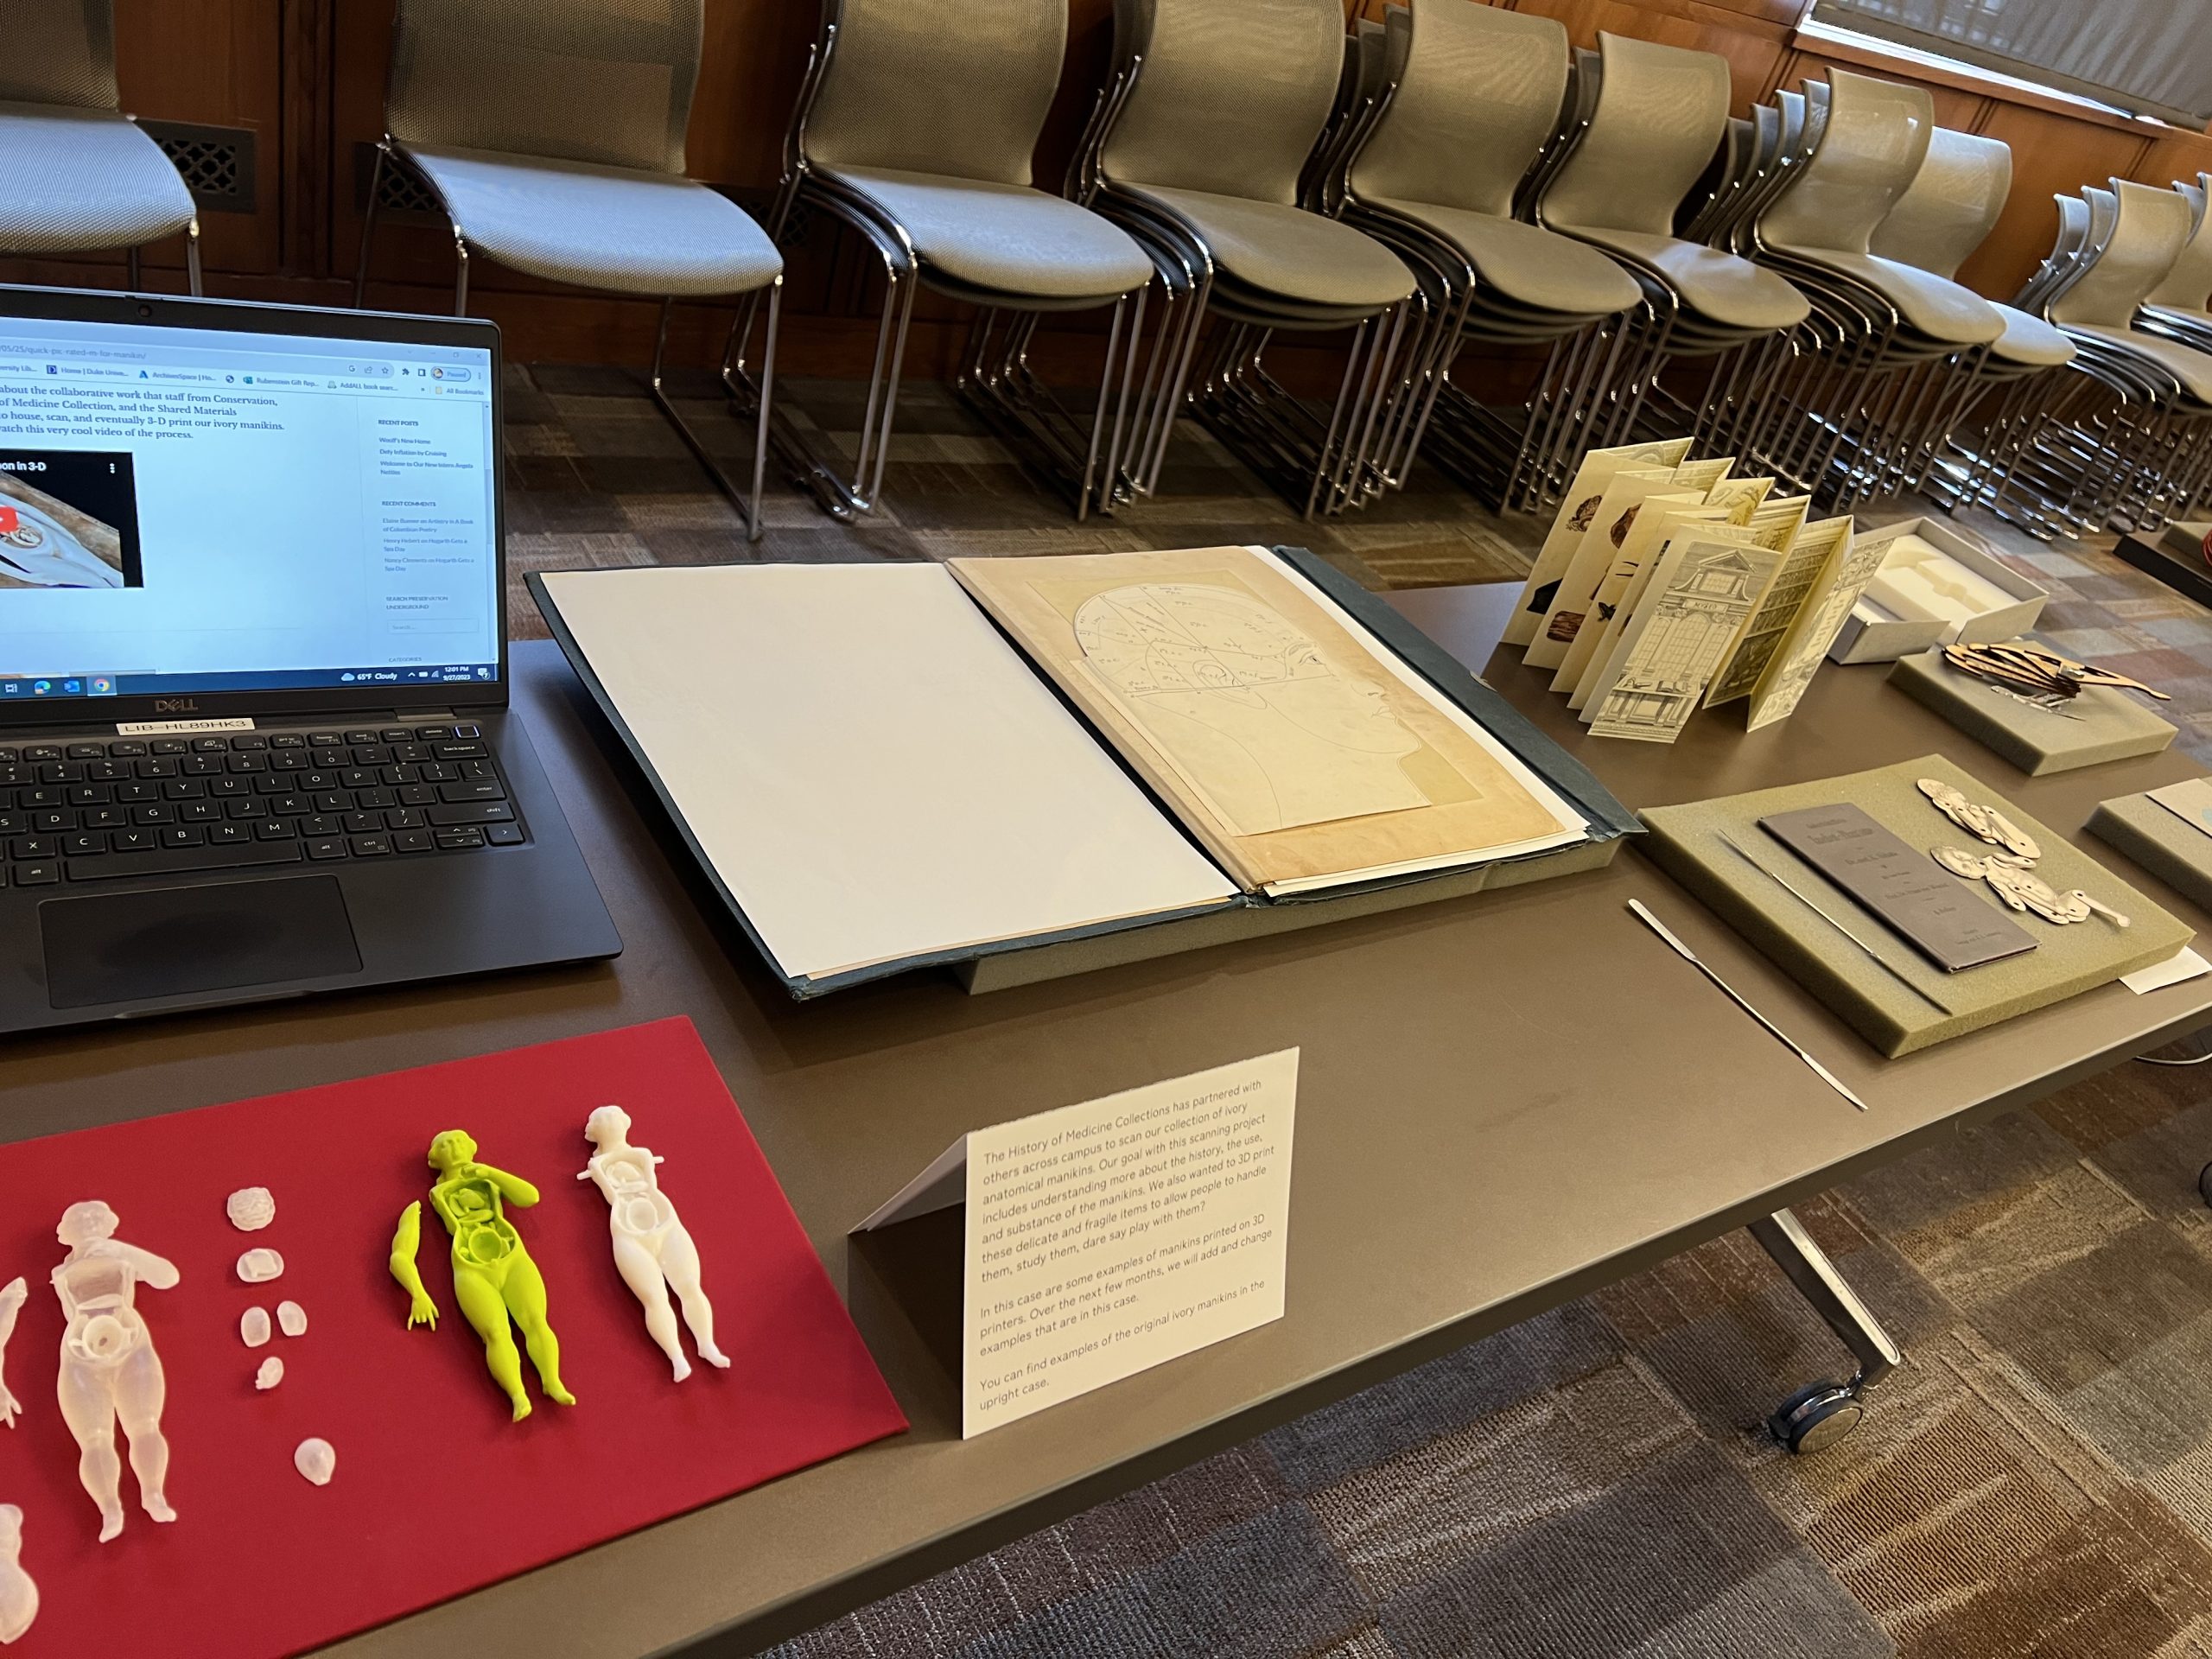 Photograph of table displaying several small, plastic anatomical figures as well as a laptop playing a video showing the making of those figures. The table also displays several books featuring pop-up components. 